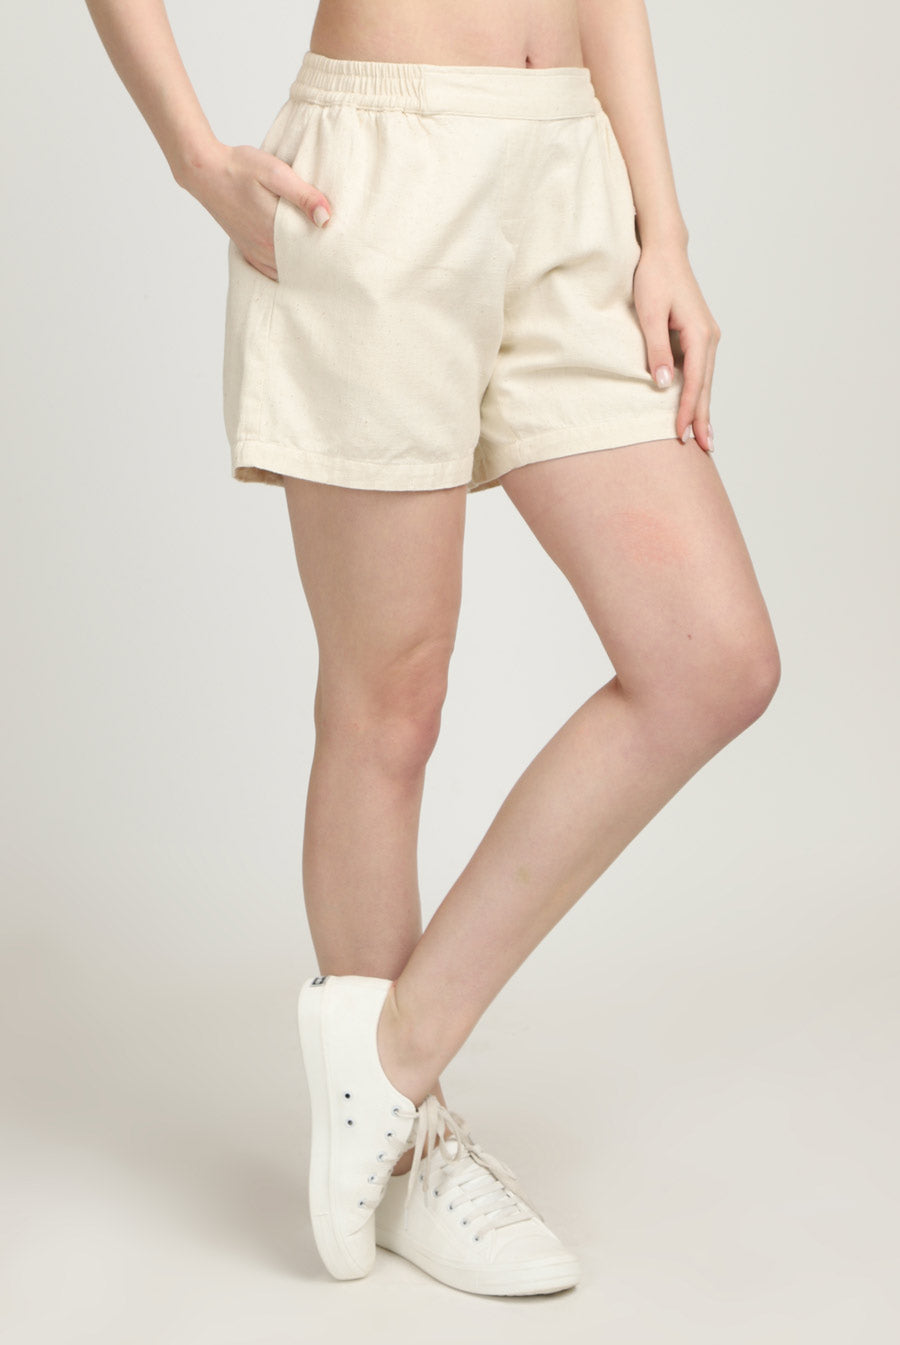 100% Cotton Yoga Shorts with Pockets